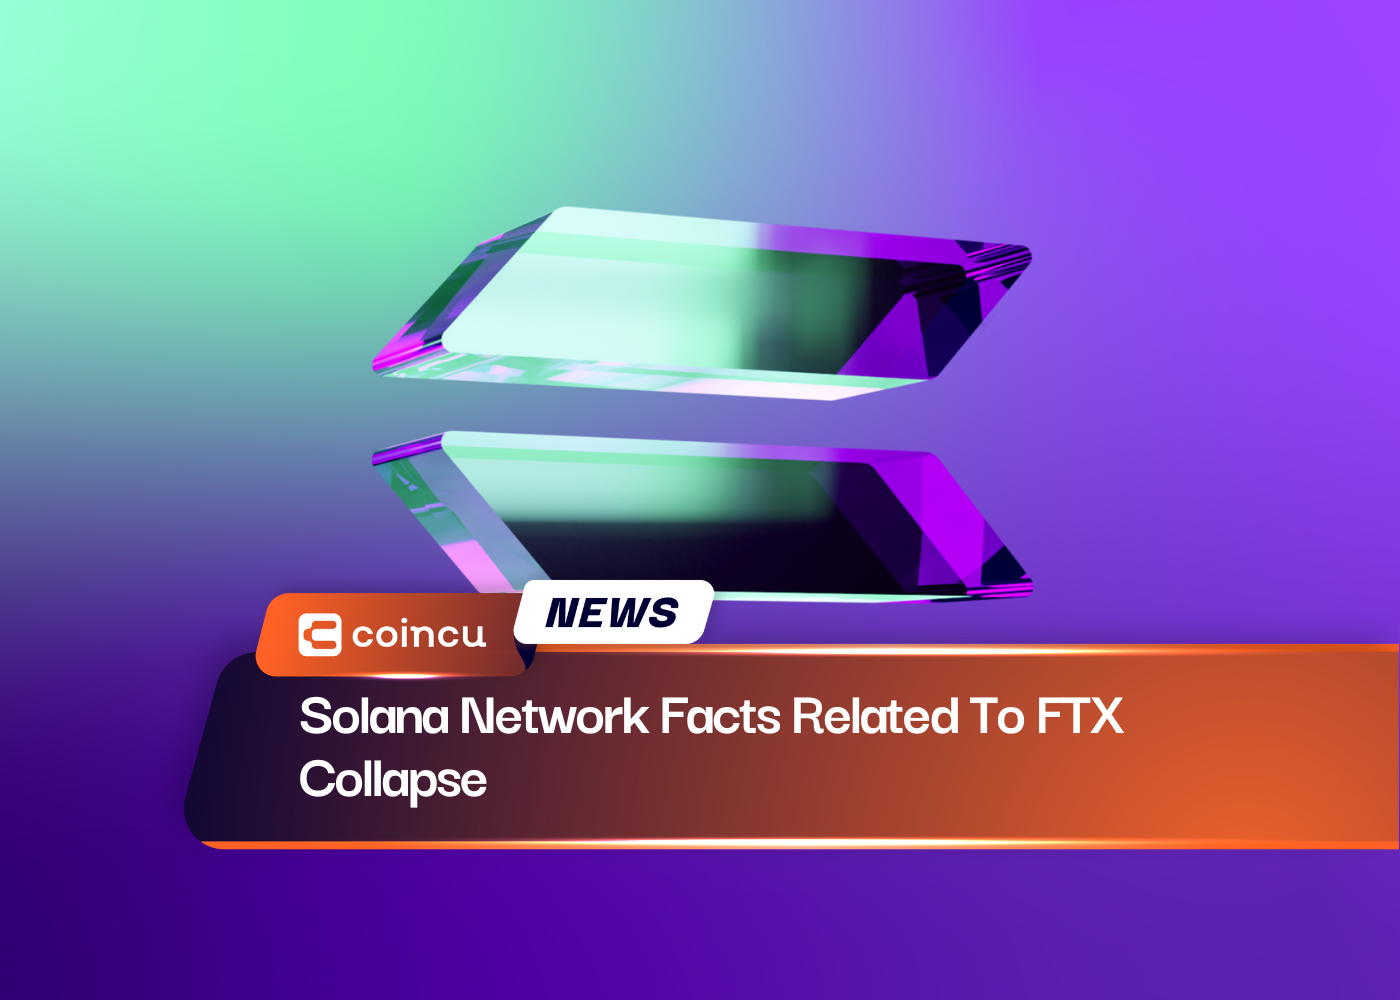 Solana Network Facts Related To FTX Collapse